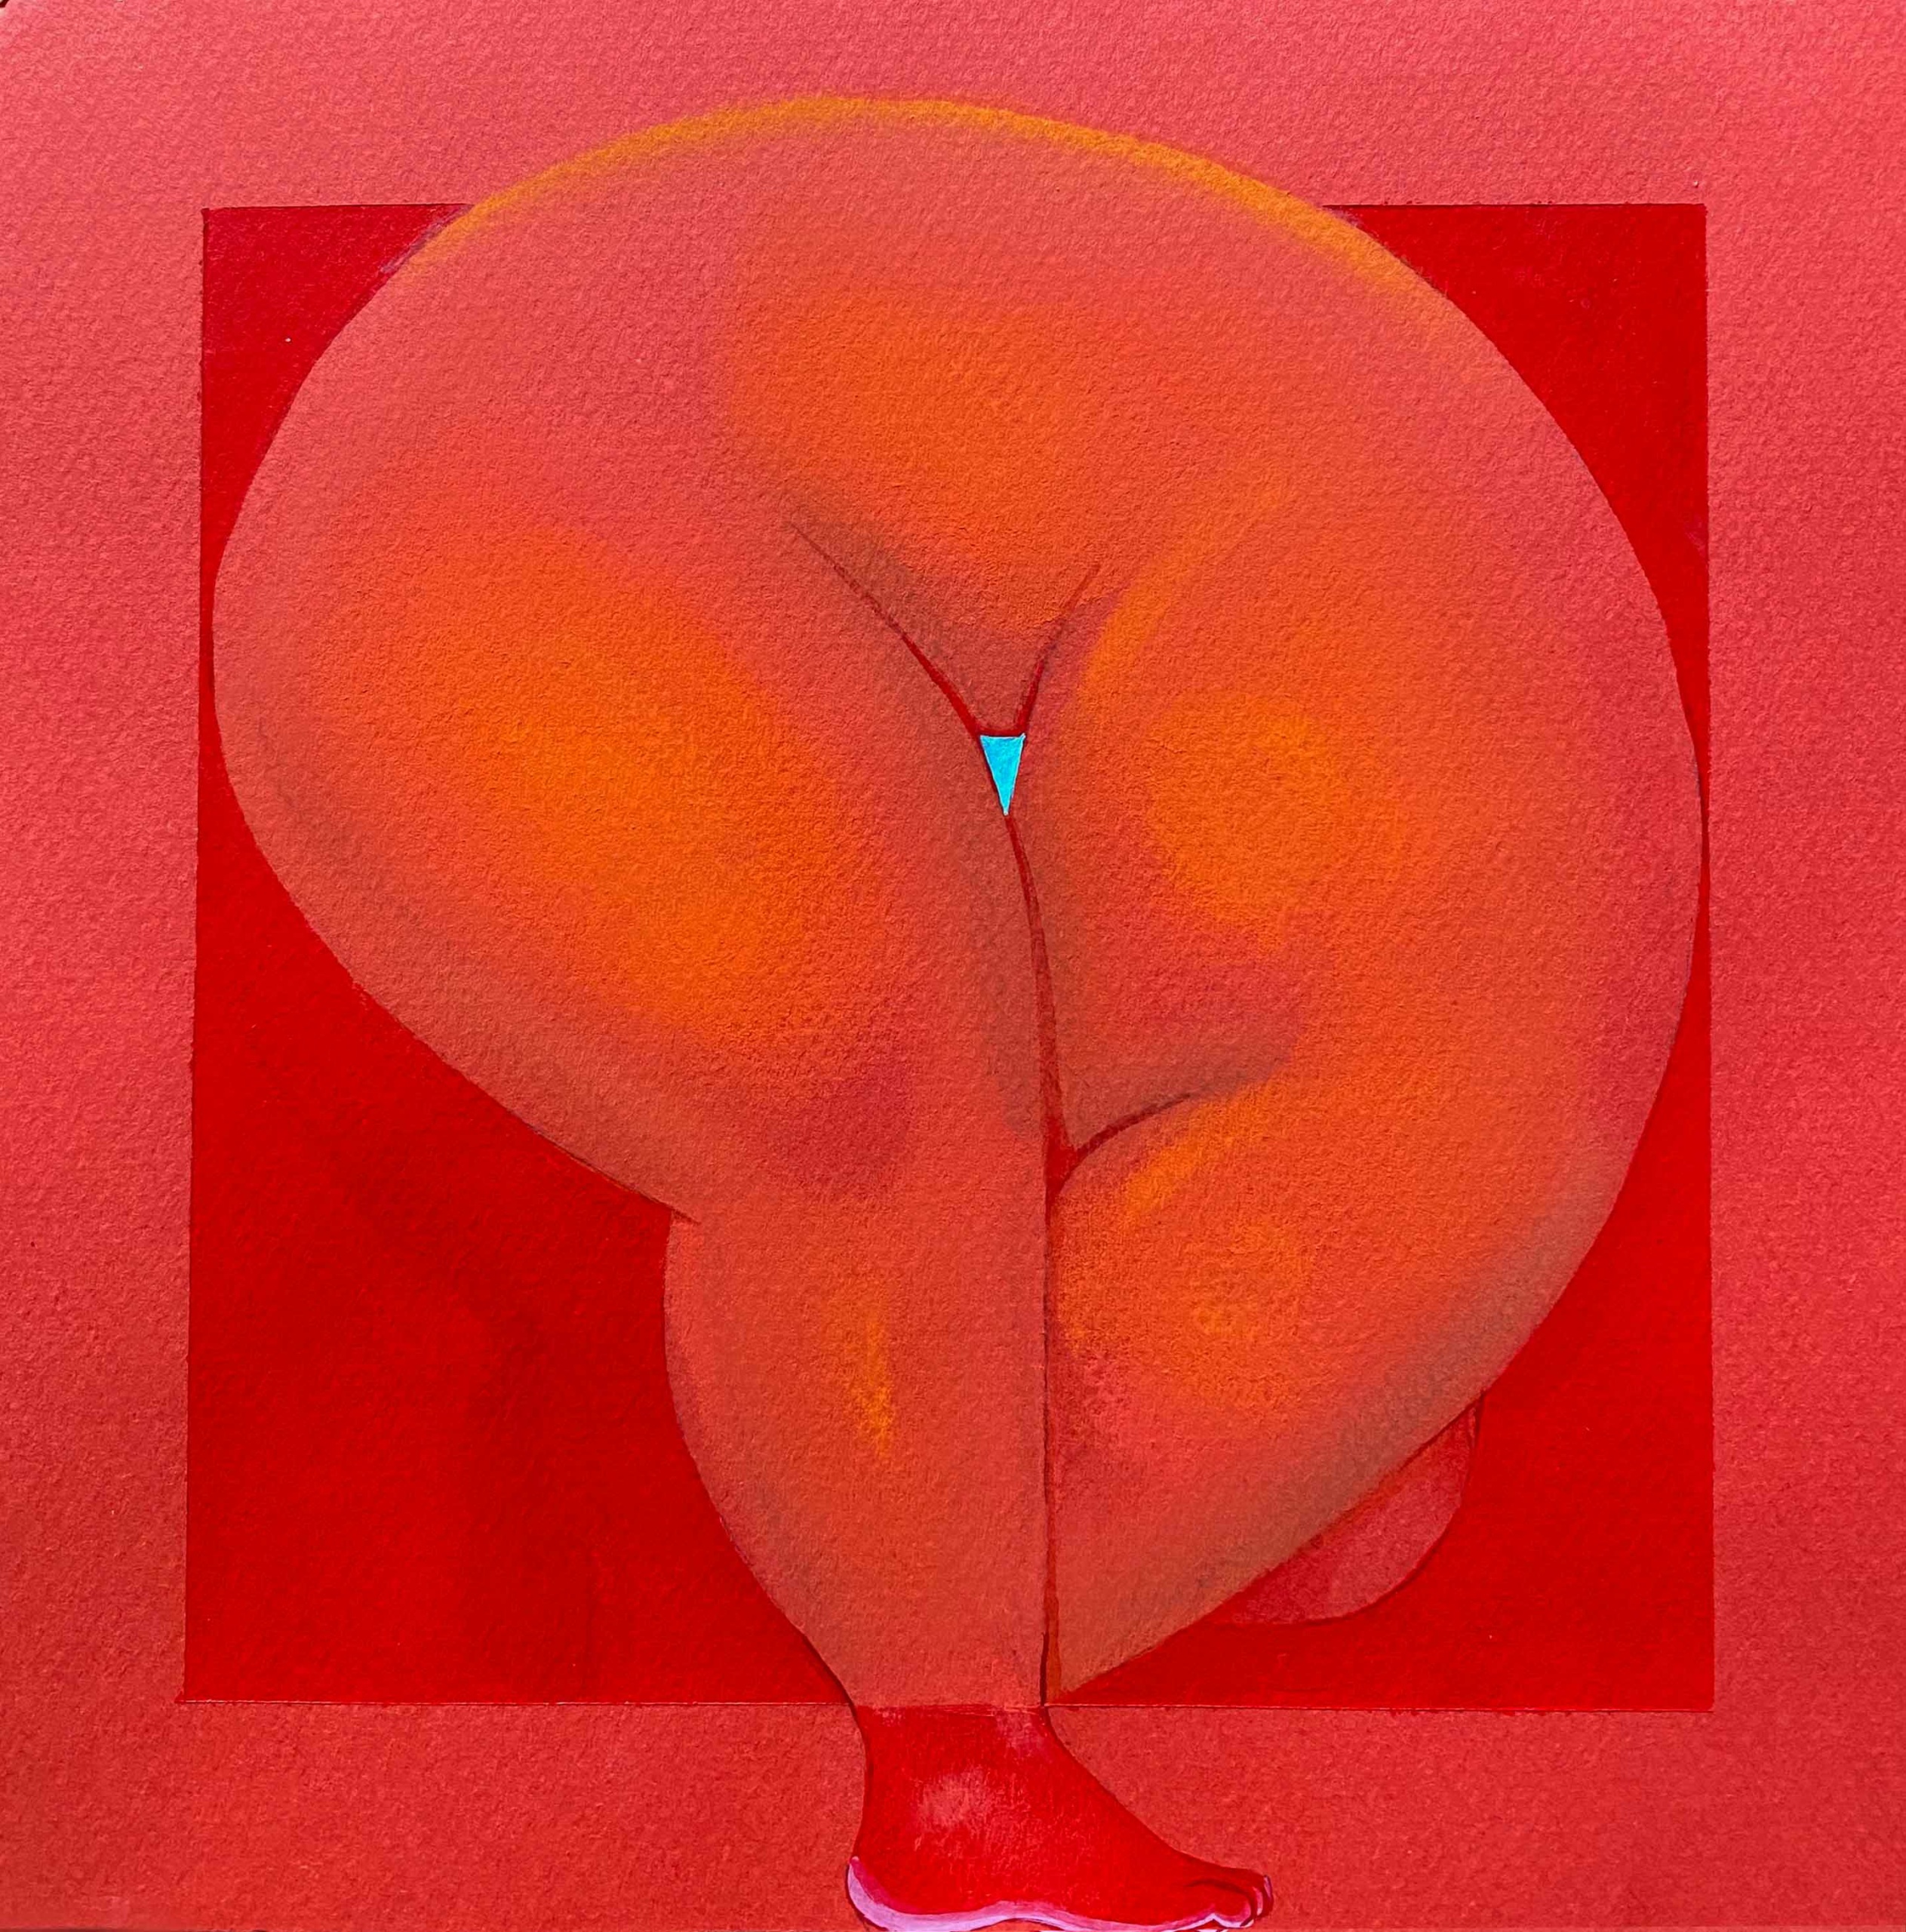 Brittney Leeanne Williams’s Red Circle in a Red Square, 2020.